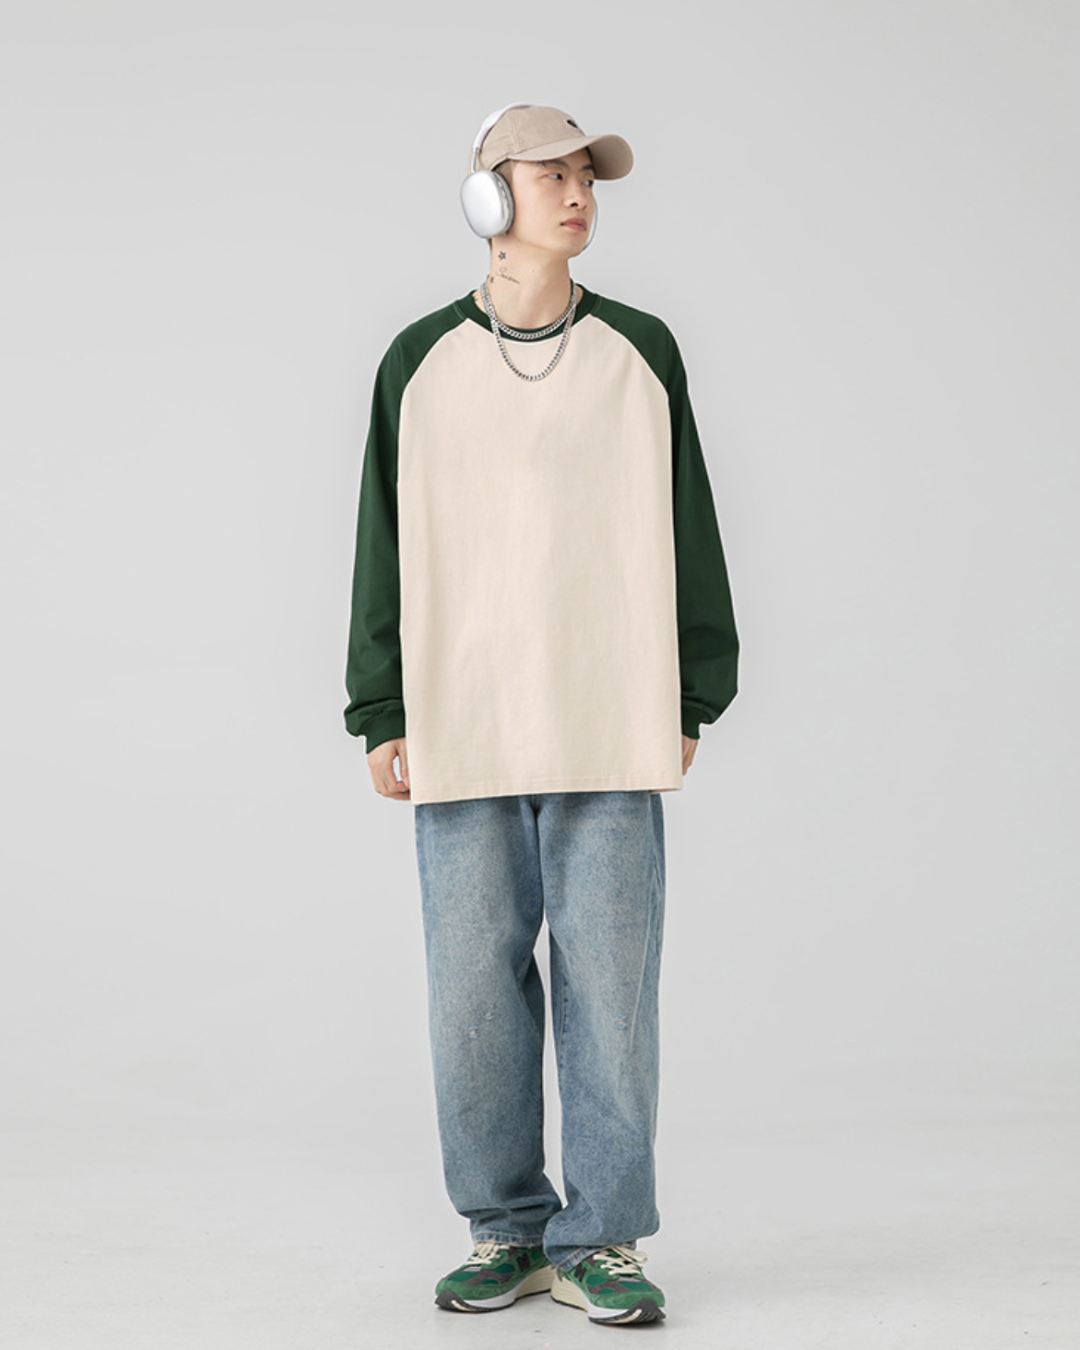 250G Dual Tone Patchwork Tee in Green